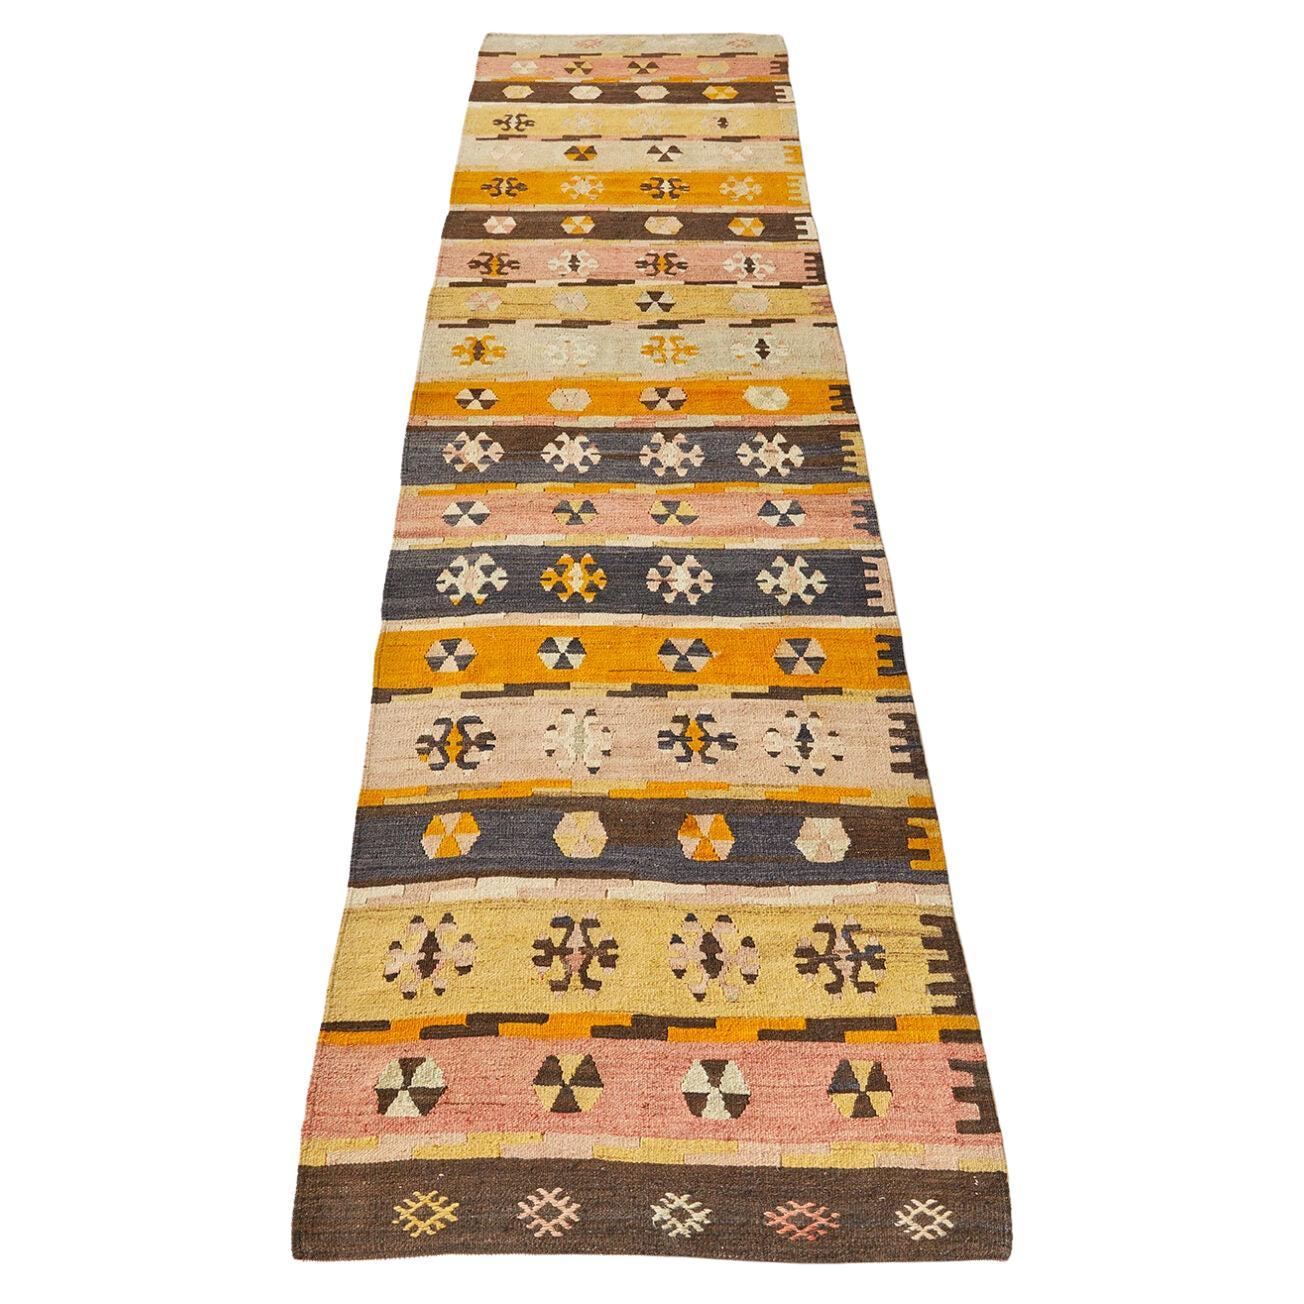 Vintage Striped Anatolian Runner with Geometric Shapes, Turkey, 20th Century For Sale